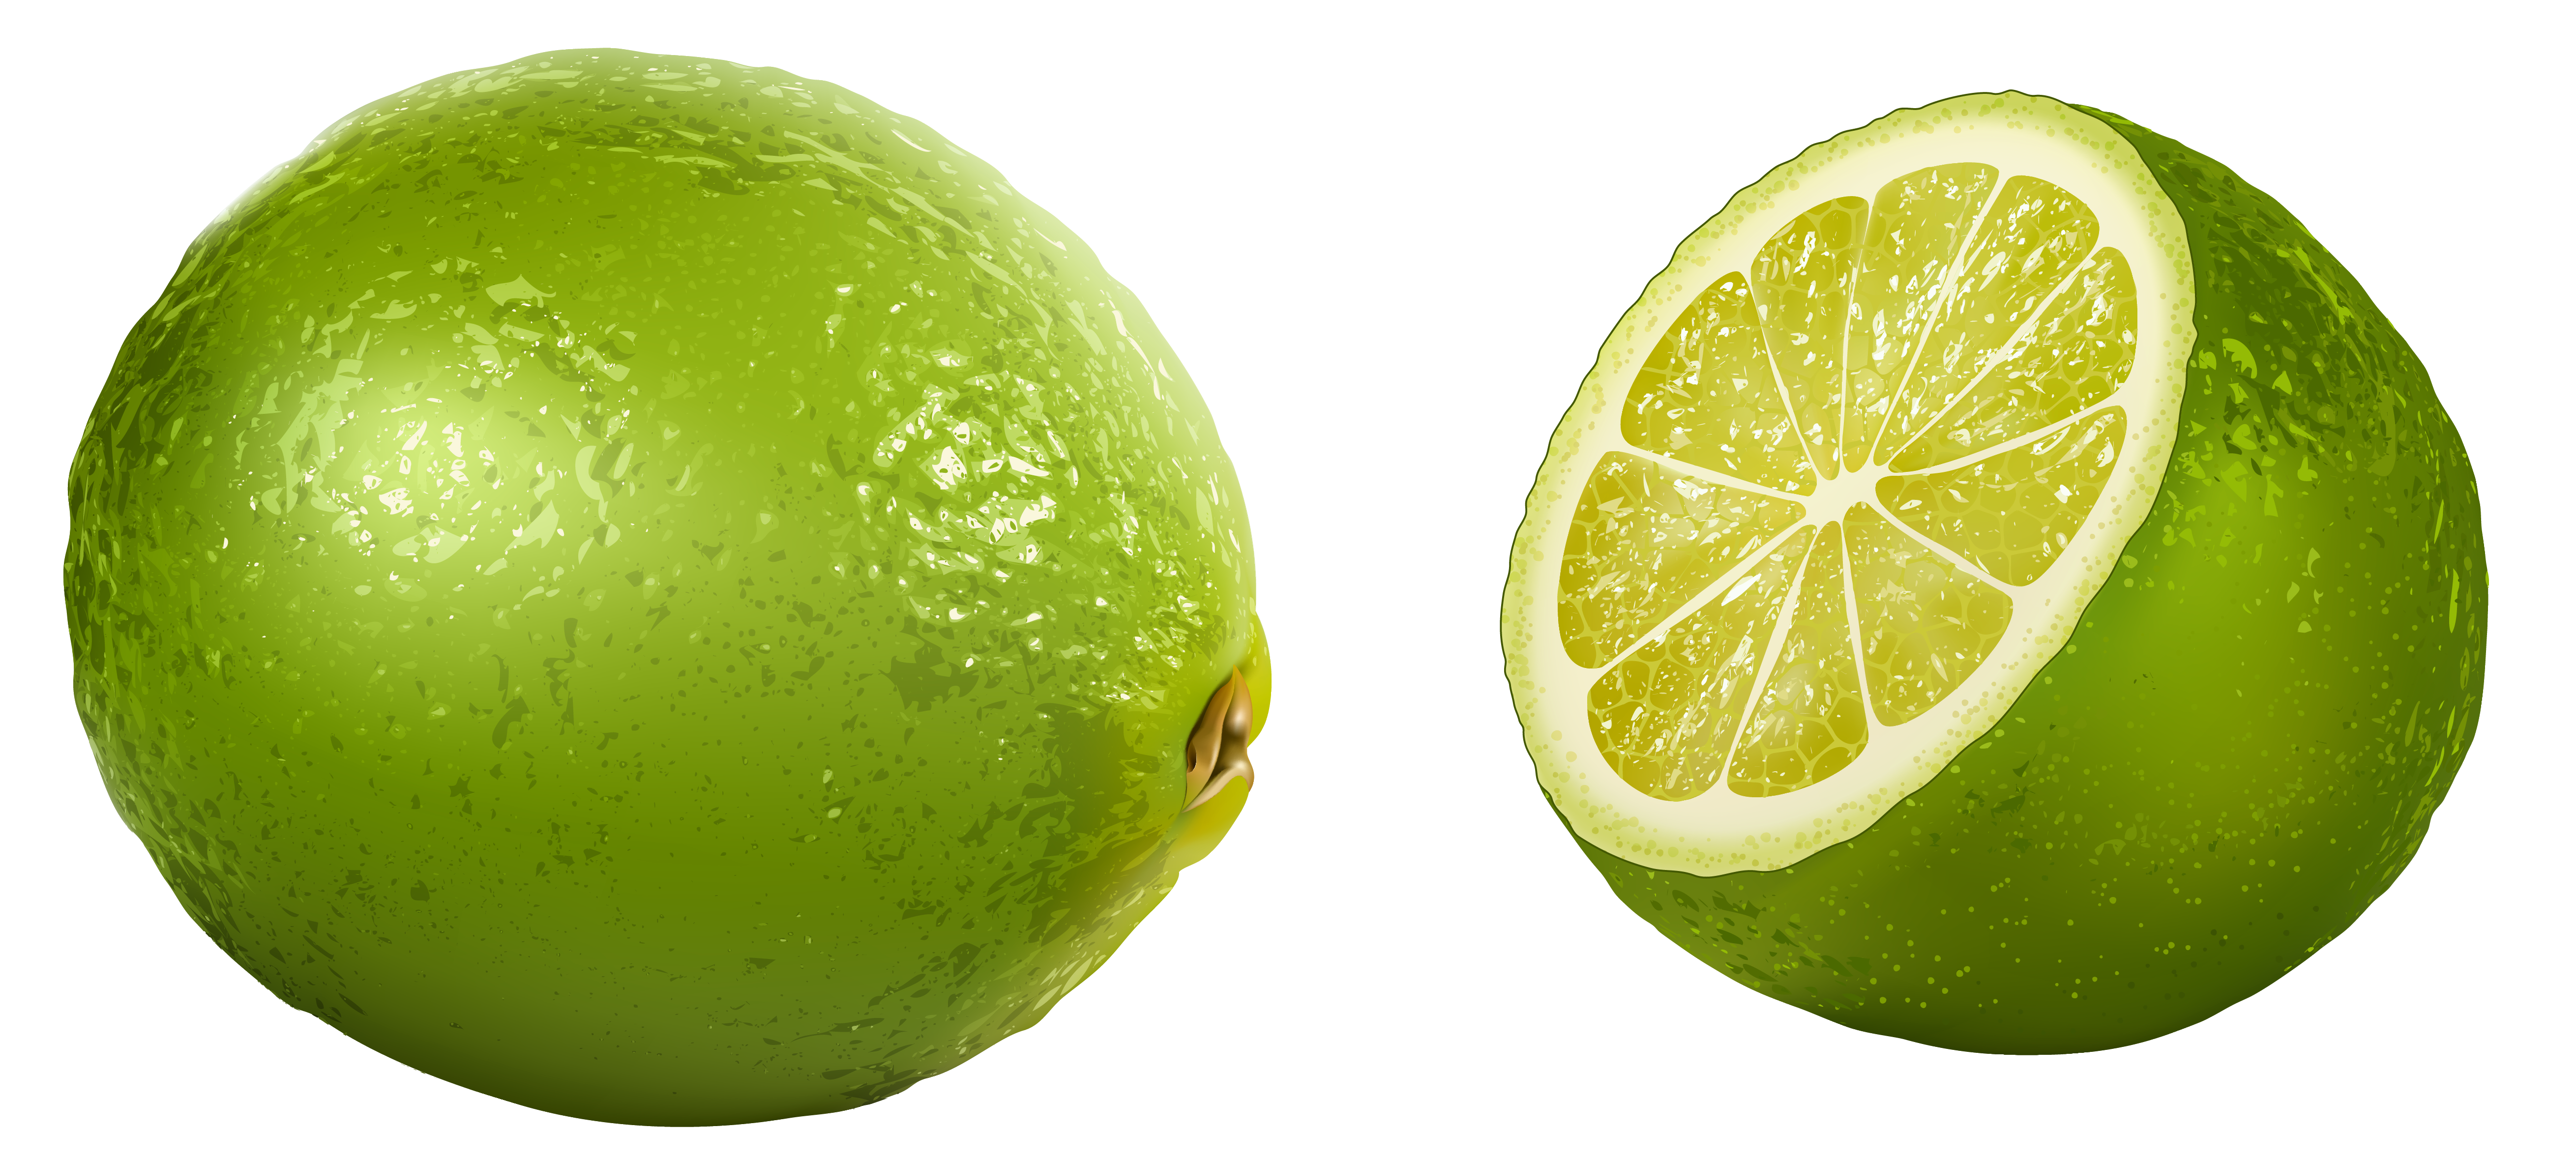 Picture gallery yopriceville high. Lime clipart